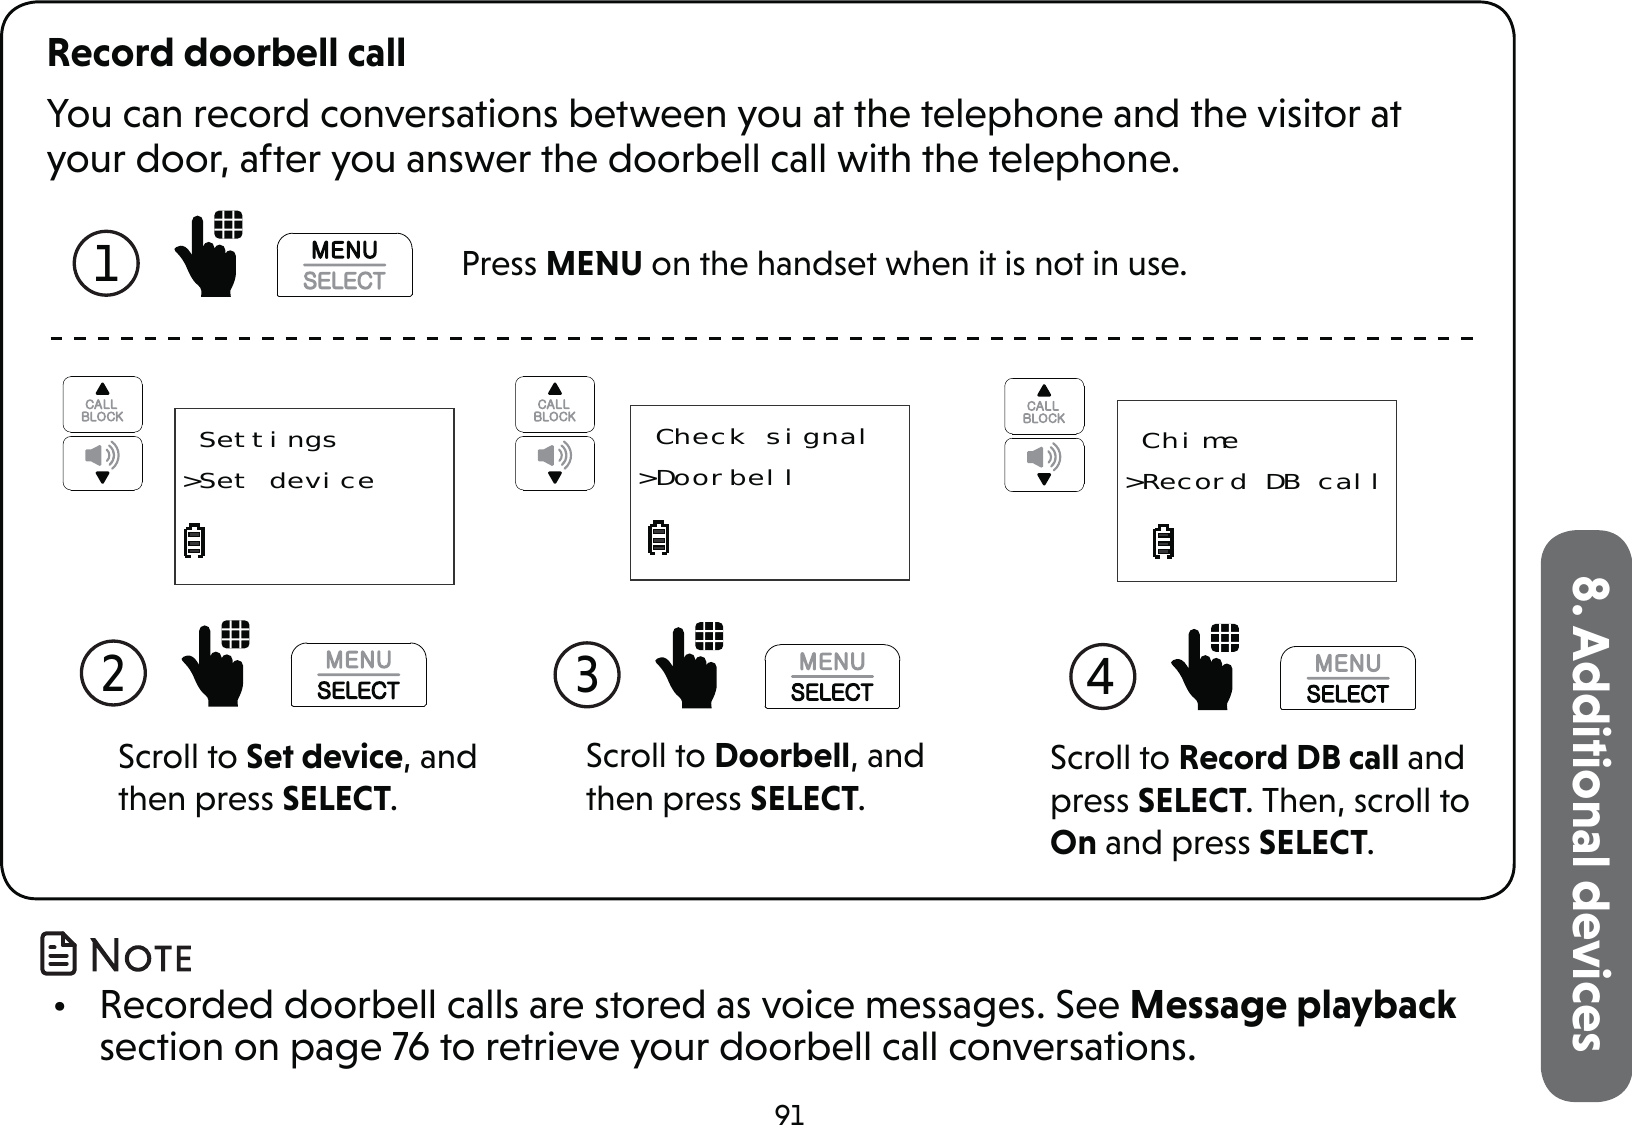 918. Additional devicesYou can record conversations between you at the telephone and the visitor at your door, after you answer the doorbell call with the telephone.Record doorbell call1   Press MENU on the handset when it is not in use.Scroll to Doorbell, and then press SELECT.3  Check signal&gt;DoorbellScroll to Set device, and then press SELECT.2   Settings&gt;Set deviceScroll to Record DB call and press SELECT. Then, scroll to On and press SELECT. Chime&gt;Record DB call4  •  Recorded doorbell calls are stored as voice messages. See Message playback section on page 76 to retrieve your doorbell call conversations.